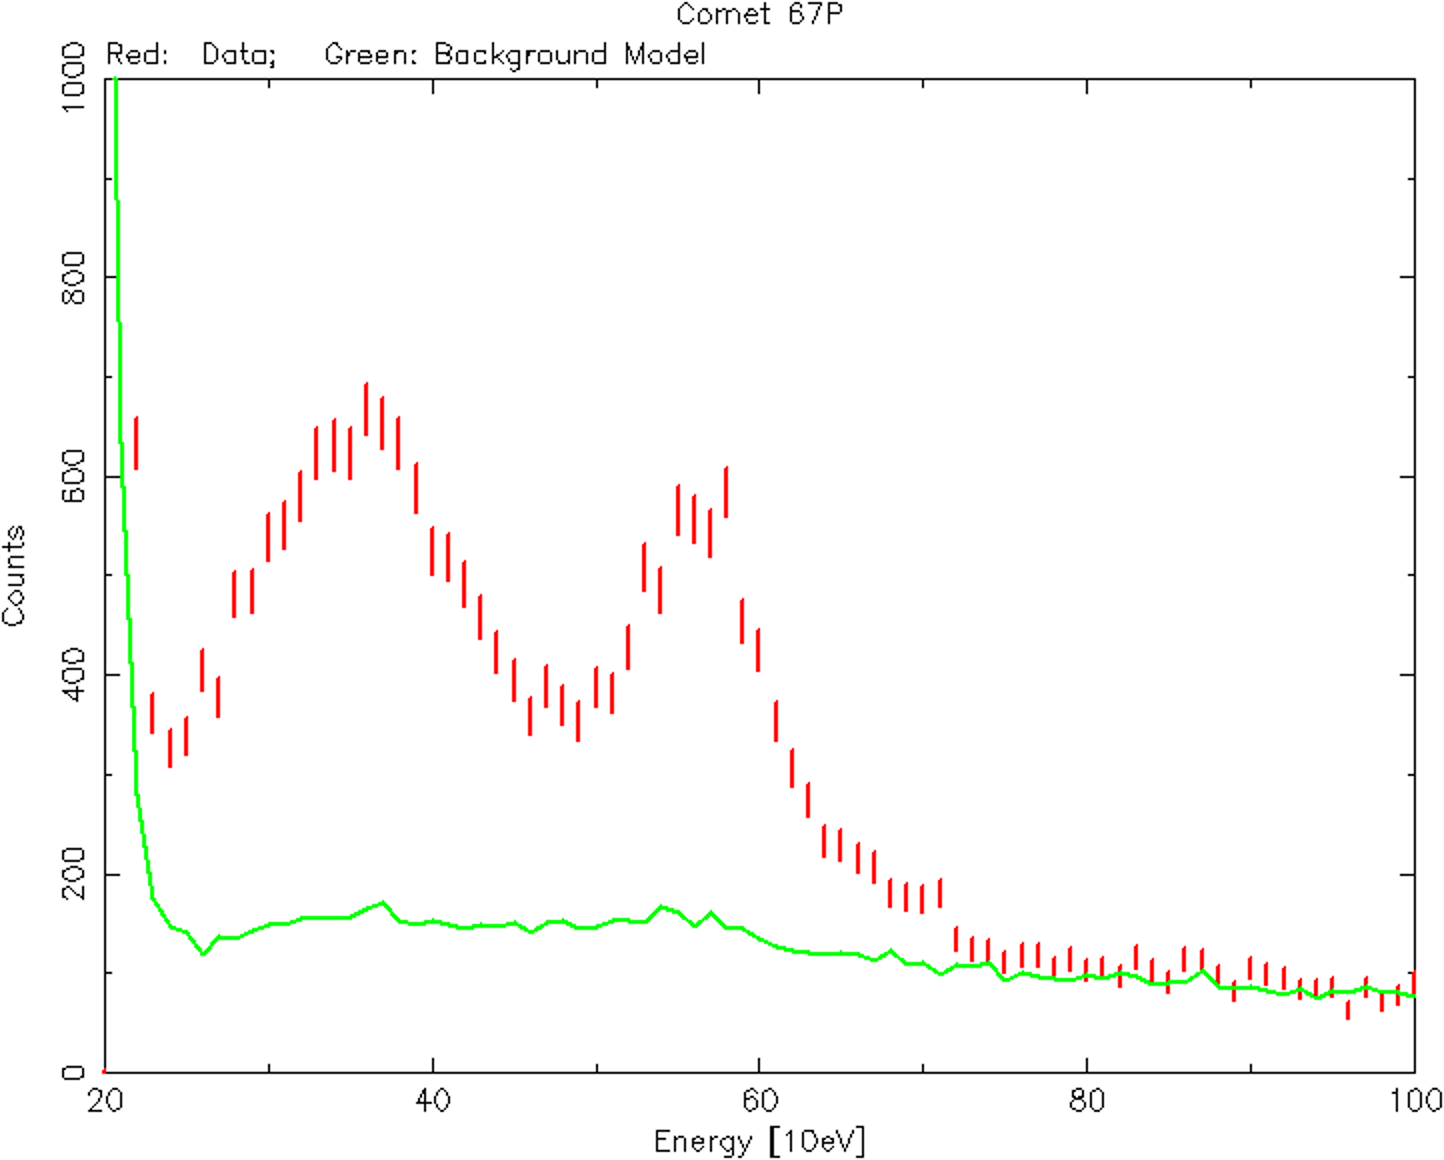 The X-ray spectrum of Comet 67P obtained by NICER clearly shows emission features consistent with charge exchange. The measurement (red) significantly exceeds the modeled background (green). Emission lines visible in the spectrum correspond to ionized carbon and nitrogen around 375 eV and oxygen between 570-590 eV. NICER observations enable us to compare, for the first time, in-situ measurements of a cometary plasma environment with remote X-ray observations of the global cometÐsolar-wind interaction.